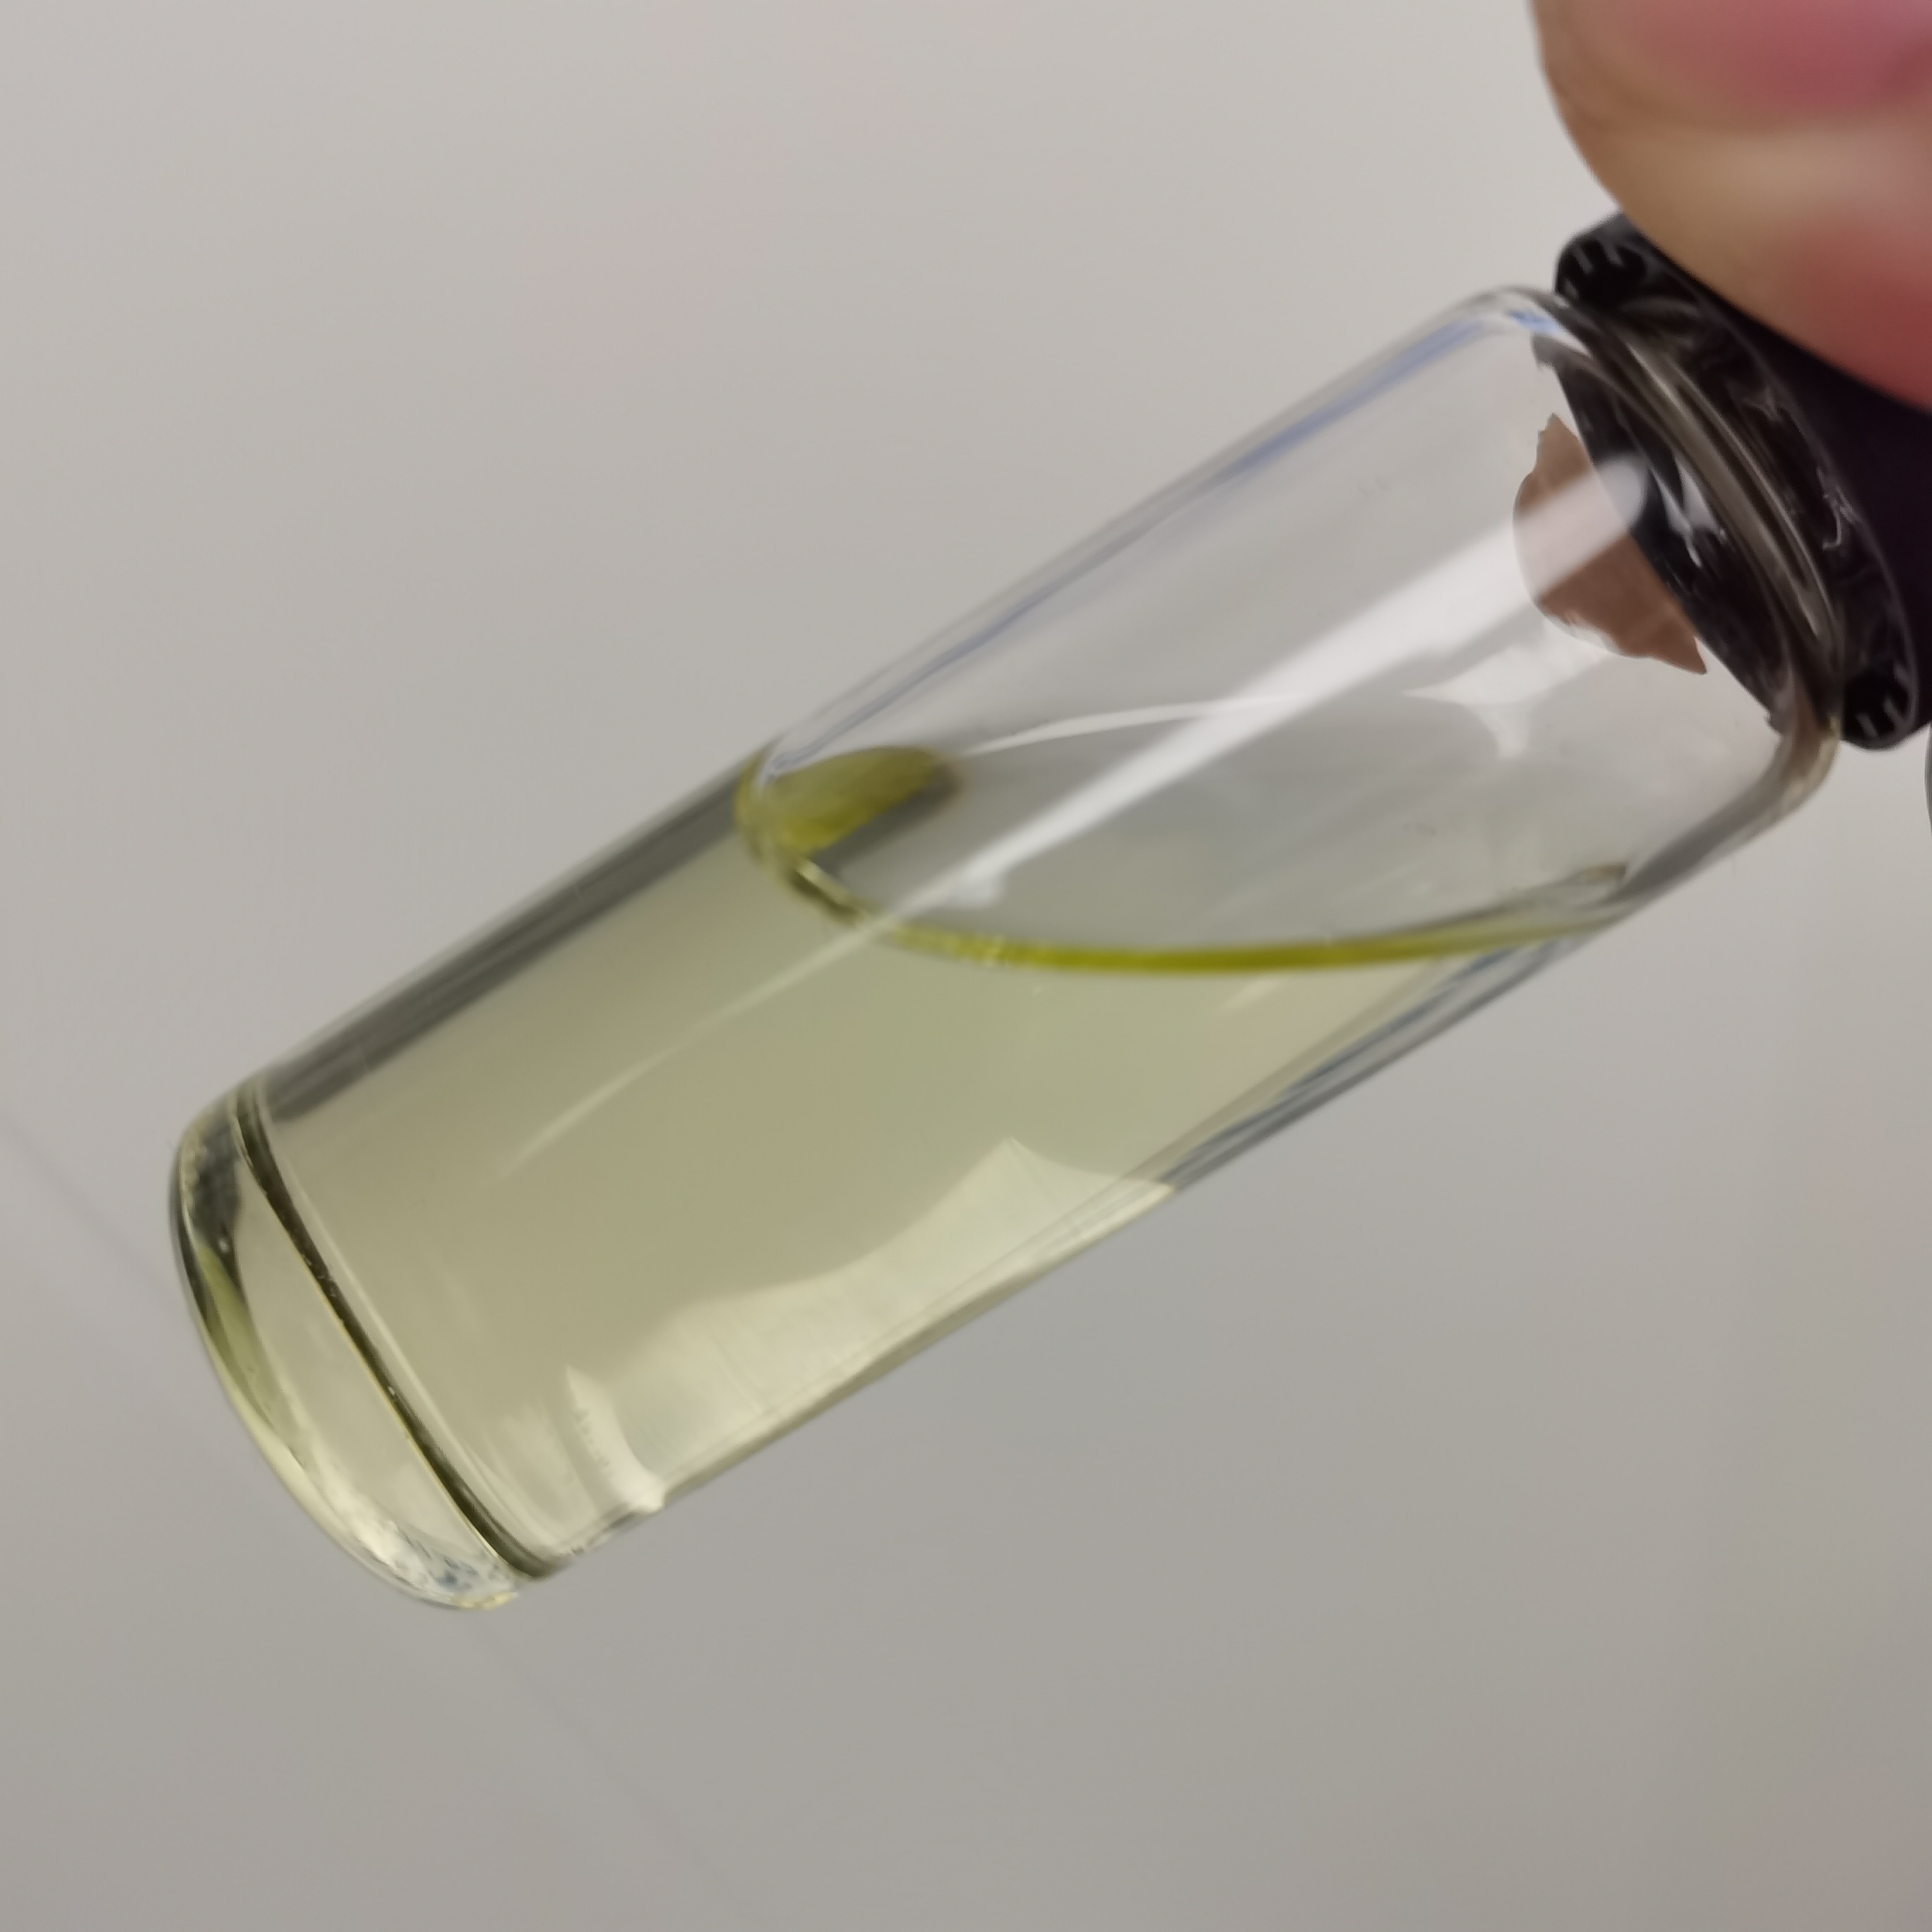 CAS 28578-16-7 PMK Ethyl Glycidate Oil with Safe Delivery